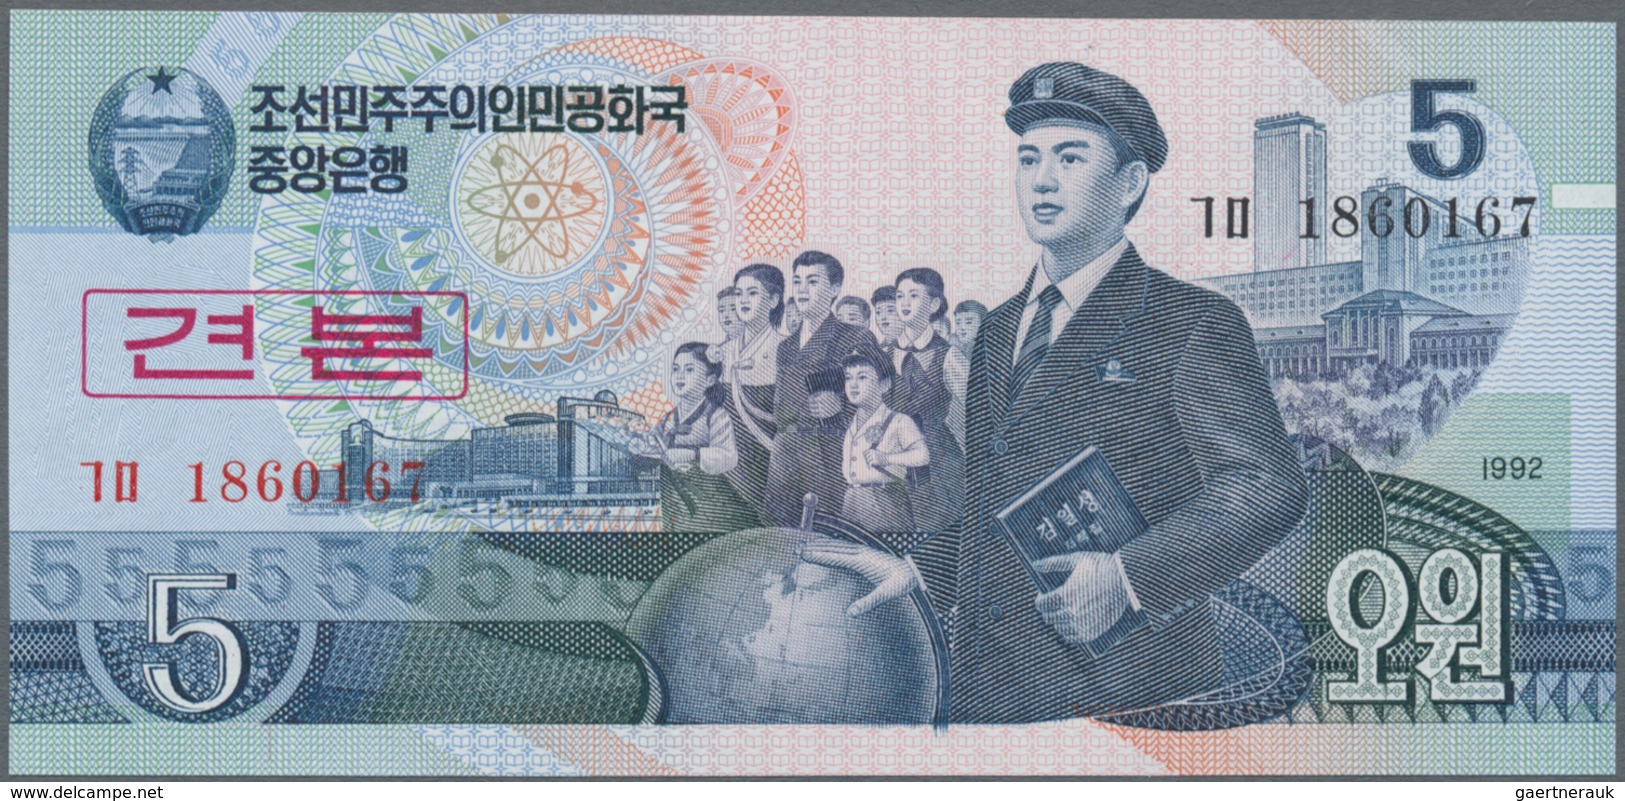 Korea: Giant lot with 94 Banknotes 1 - 5000 Won 1978-2013 containing for example 1, 5, 10, 50, 100 W